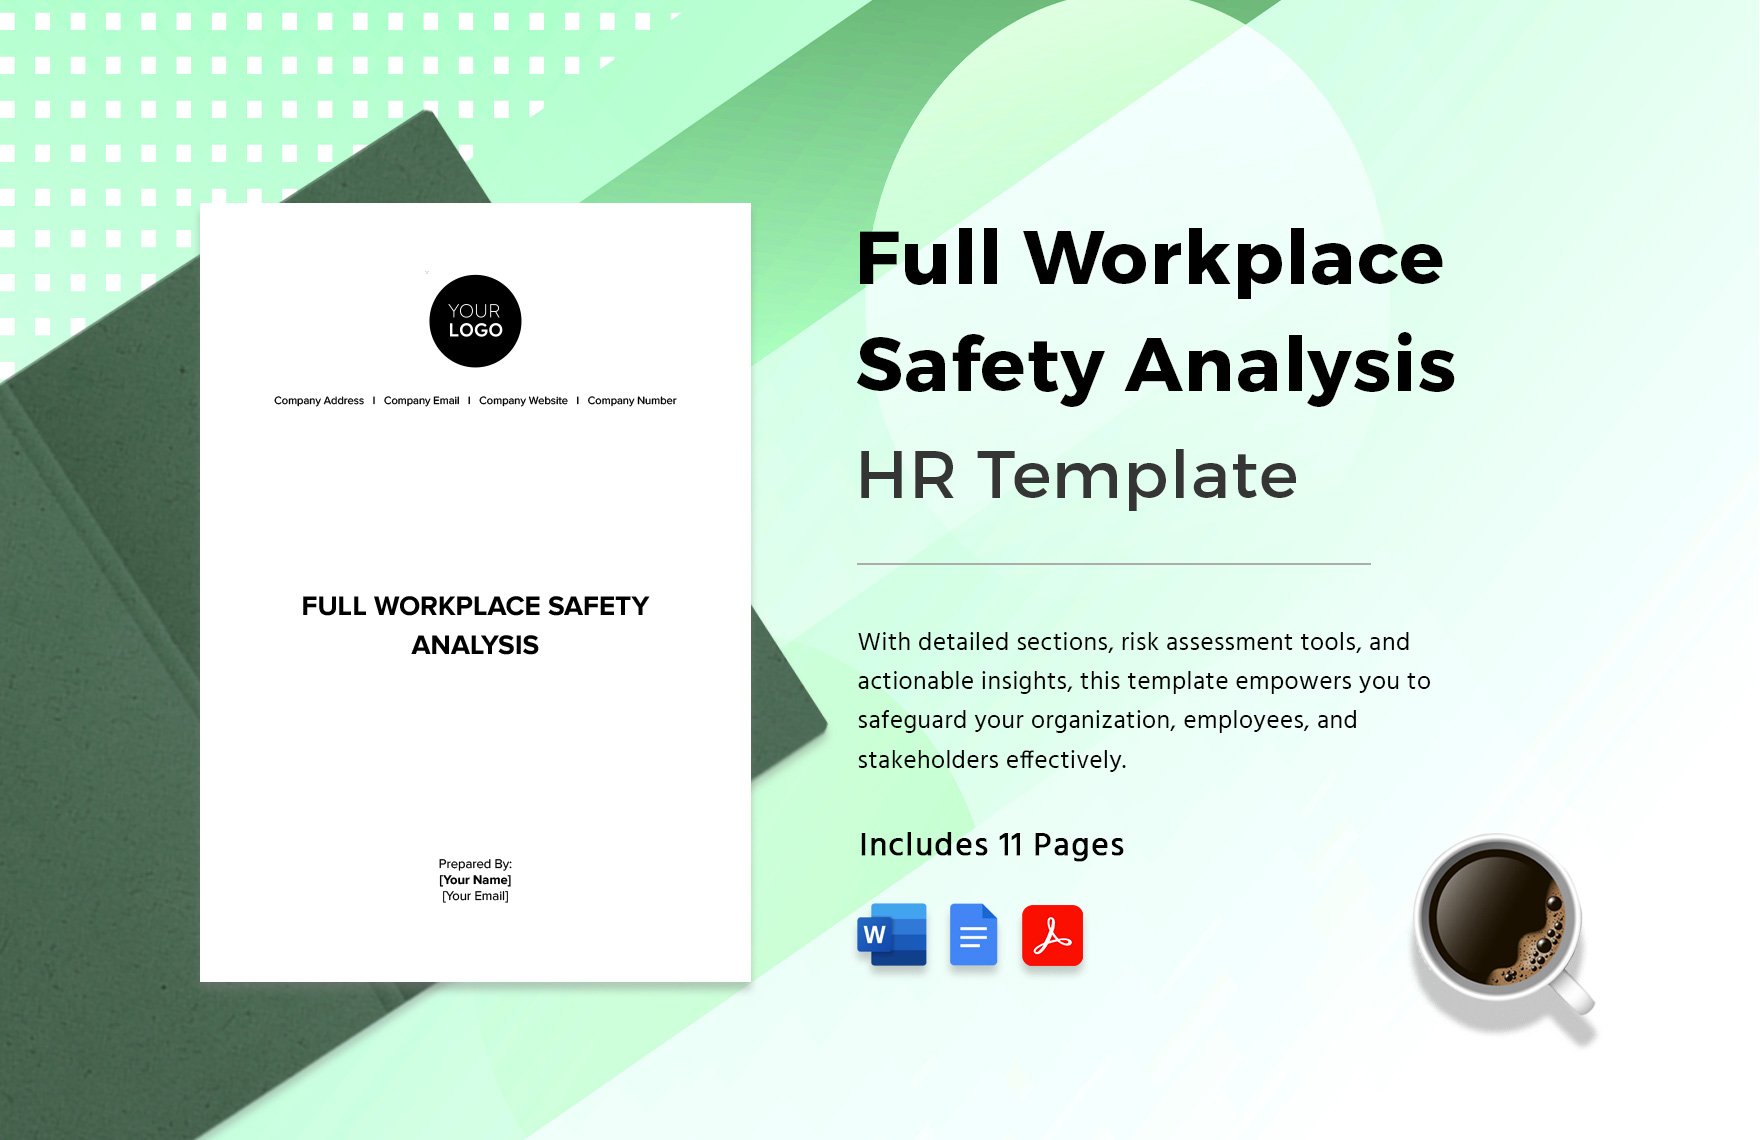 Full Workplace Safety Analysis HR Template